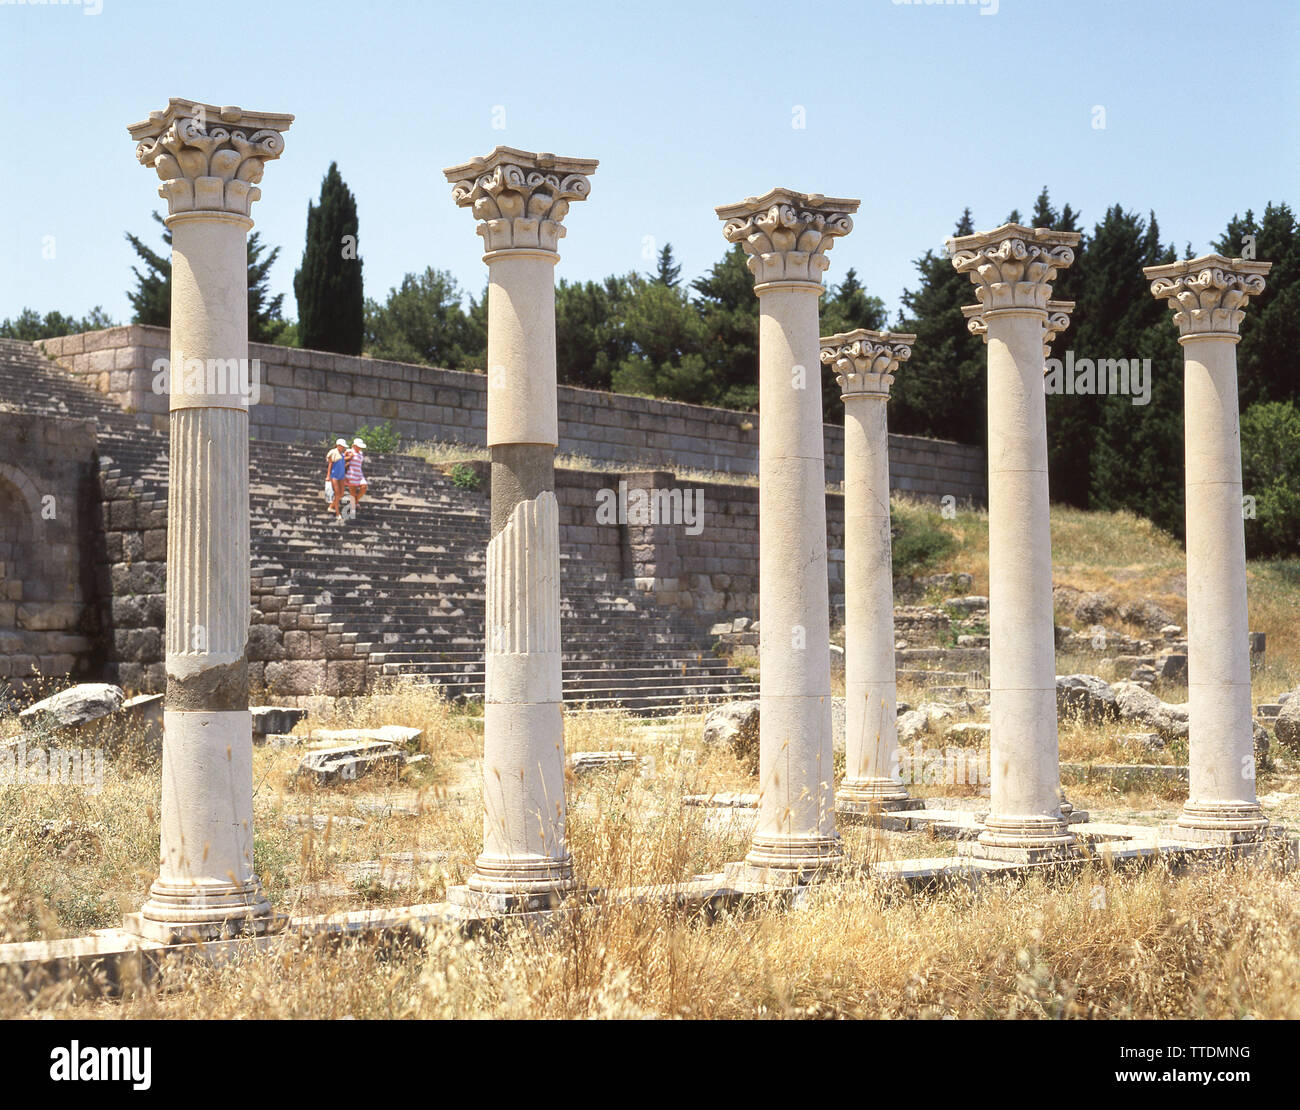 Corinthian columns on The Middle Terrace of The Asklepieion, Plantini, Kos (Cos), The Dodecanese, South Aegean Region, Greece Stock Photo